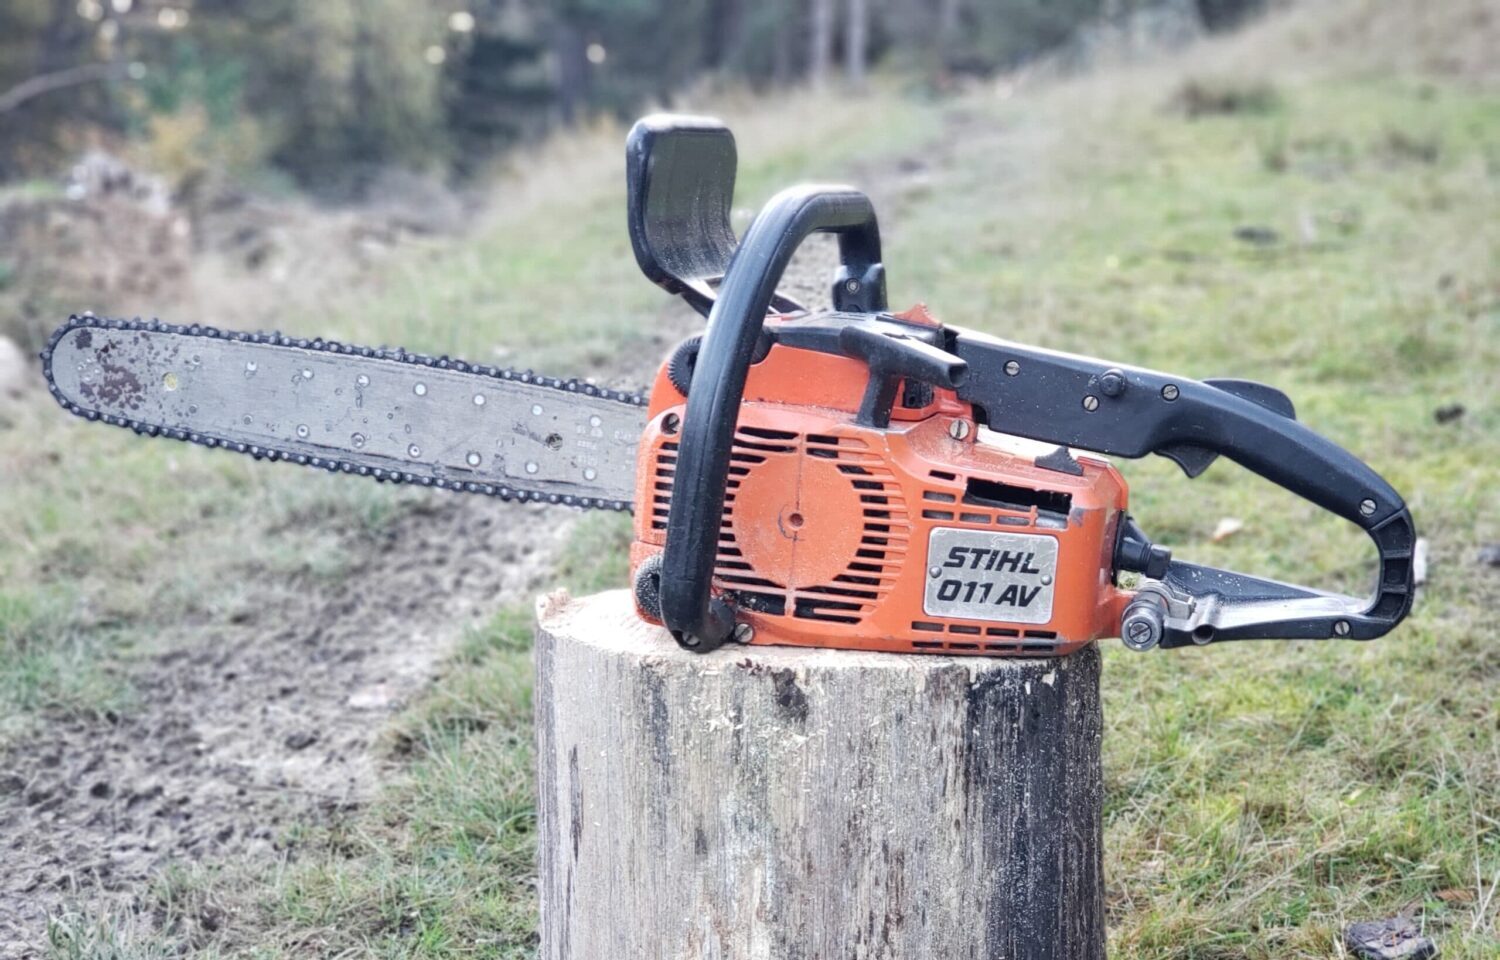 Stihl 011 AV Chainsaw 2023: Specs, Features, Made